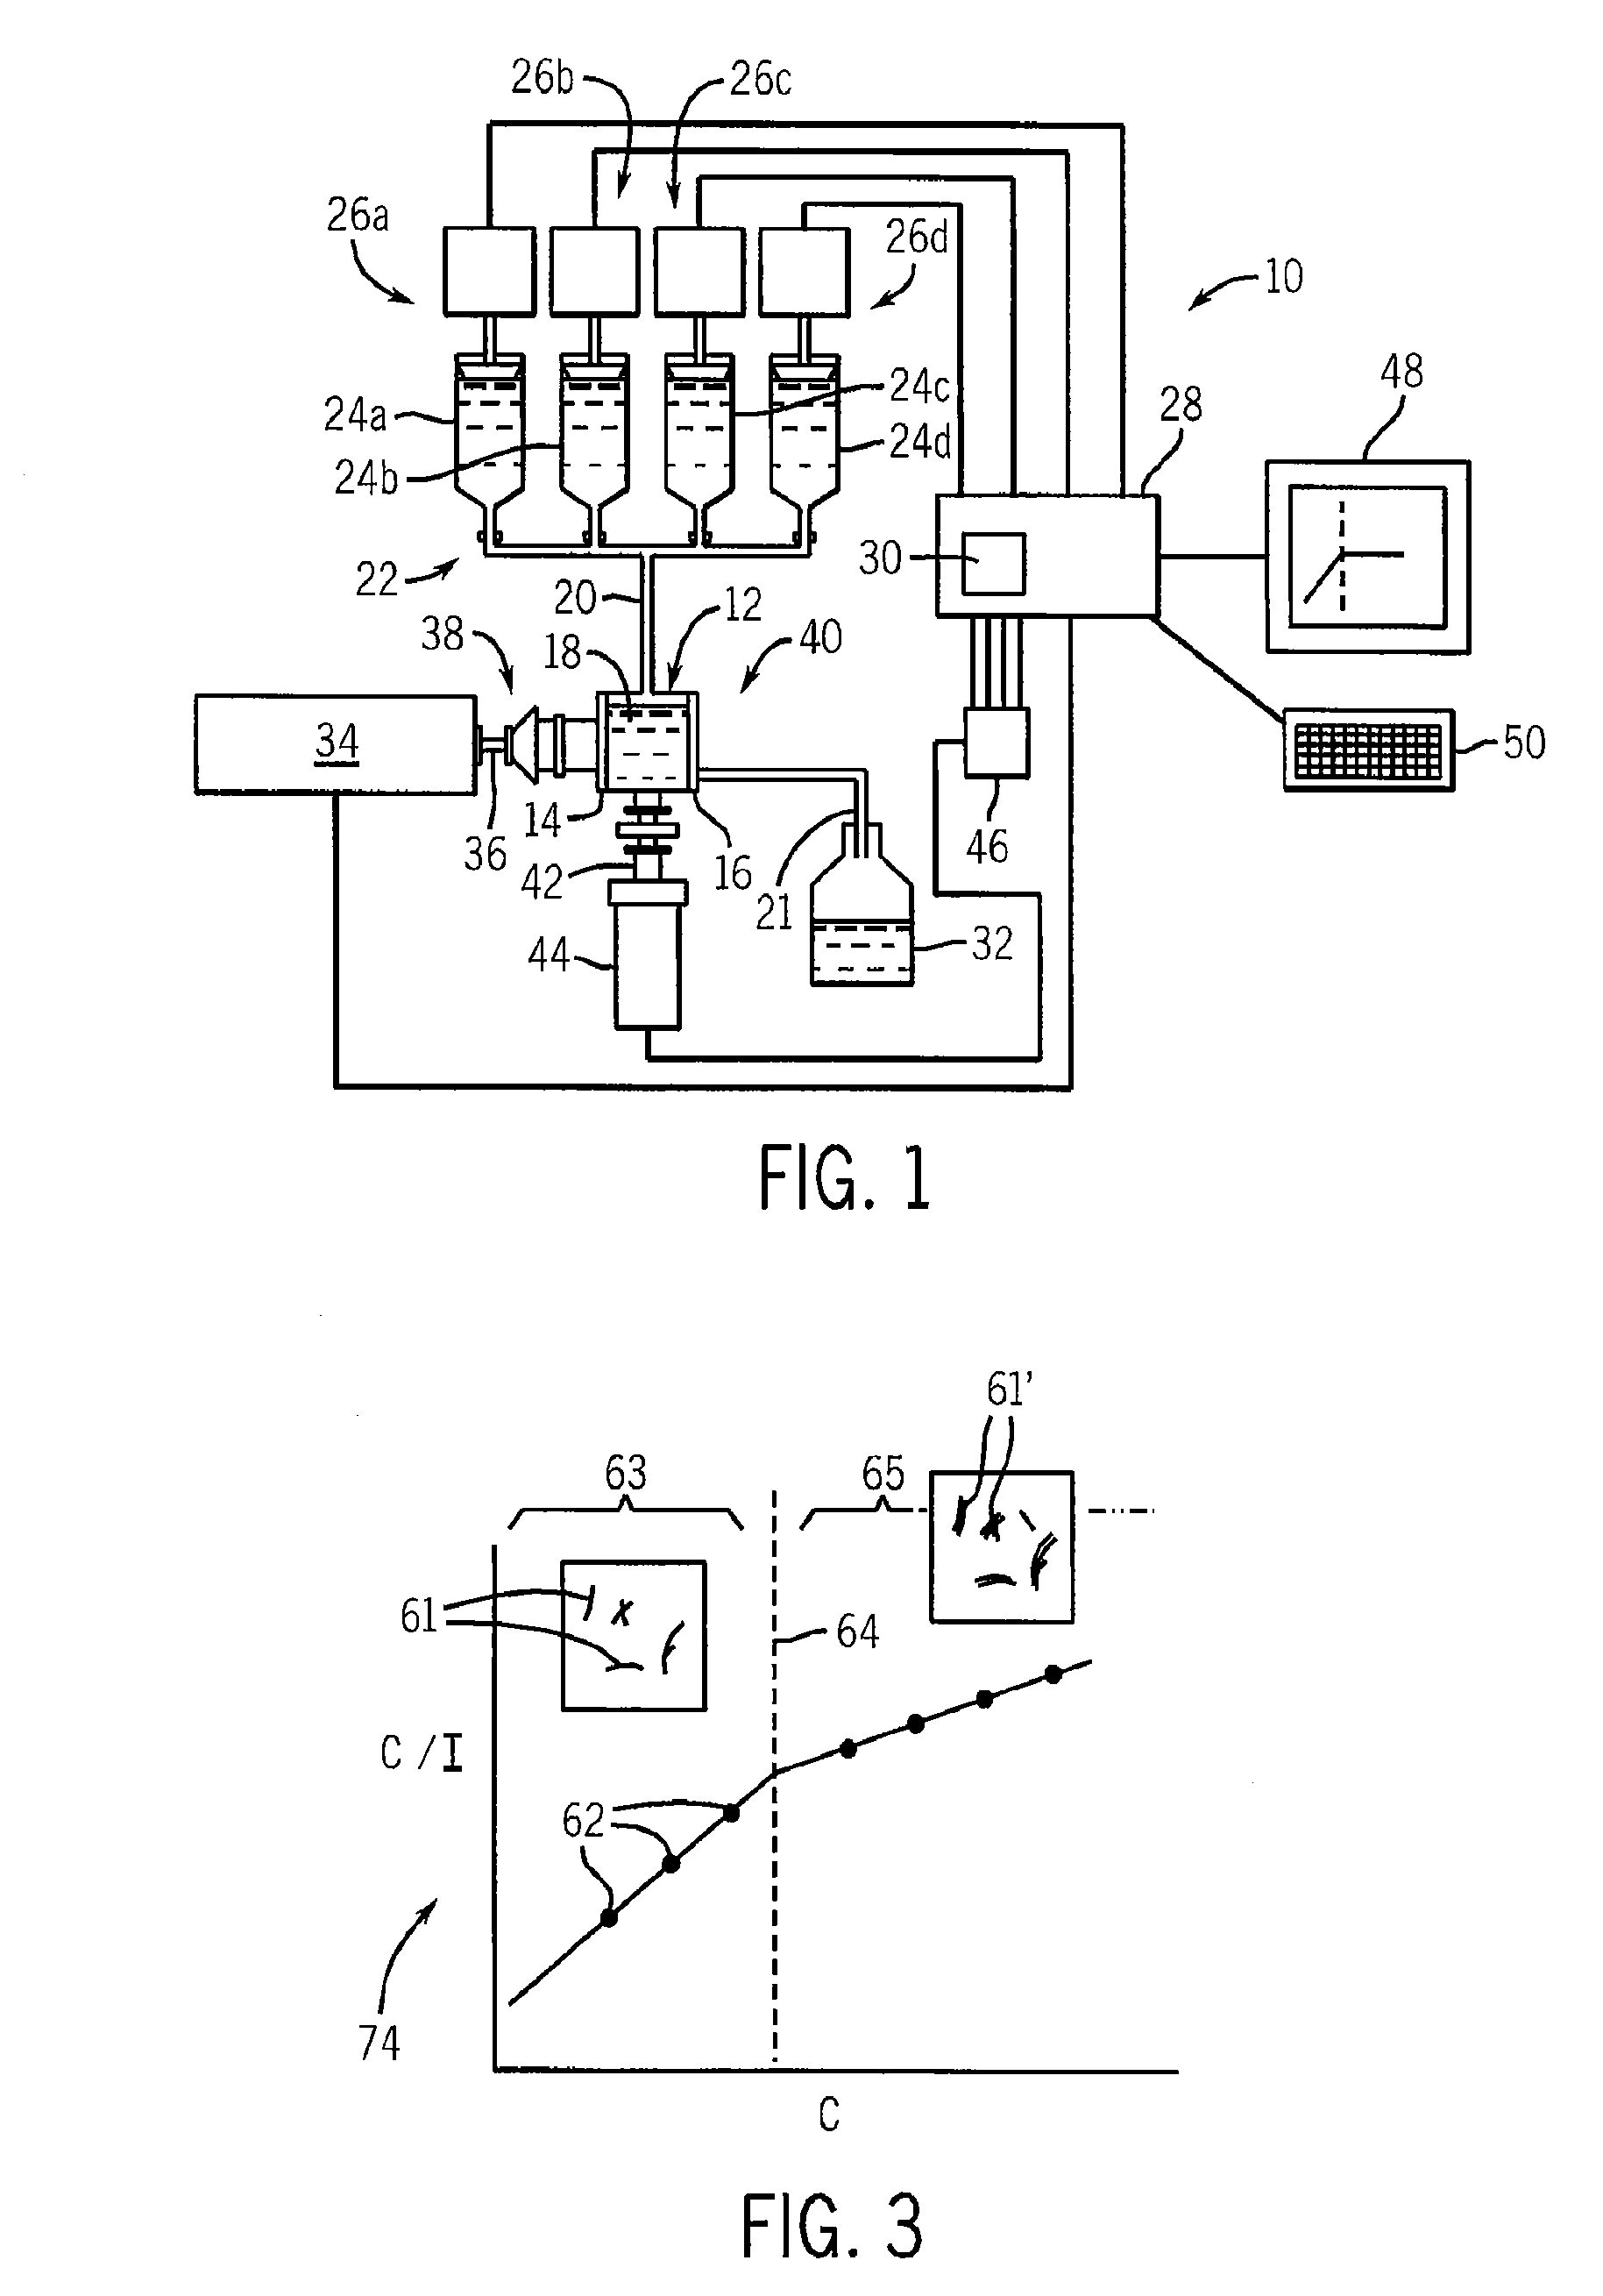 Method And Apparatus For Identifying And Characterizing Material Solvents And Composited Matrices And Methods Of Using Same